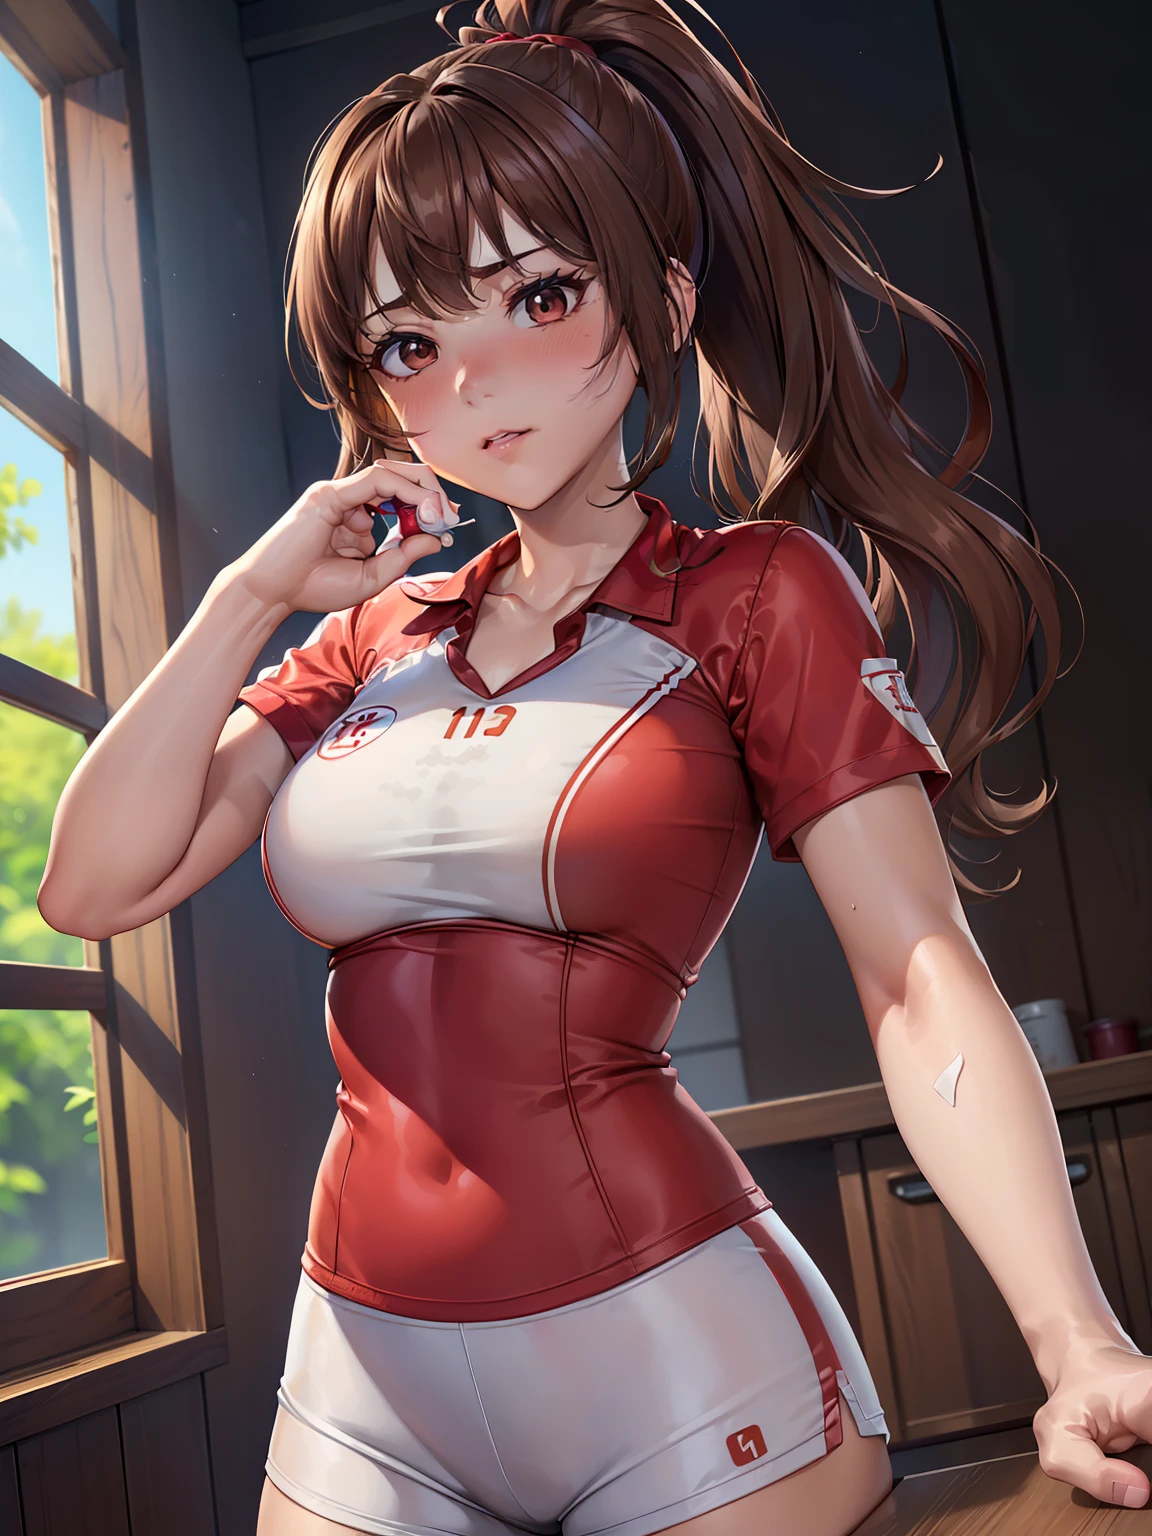 table top, highest quality, High resolution,  perfect pixel,  4K,, 1 girl, single, alone, beautiful woman、I could see the whole body、 ((ponytail、wavy hair, bangs, brown hair)), ((brown eyes, beautiful eyelashes, realistic eyes)), ((detailed face, blush:1.2)), ((smooth texture:0.75, realistic texture:0.65, realistic:1.1, Anime CG style)), dynamic angle, perfect body,  ((Red and white volleyball  uniform、Red and white short-sleeved shirt、white shorts、、、))、(in the lab)、、((holding medicine )) 、upward glance、、  ((very small breasts )),weak unhealthy ,(((very thin))) (syringe ) test tube ,experiment table 